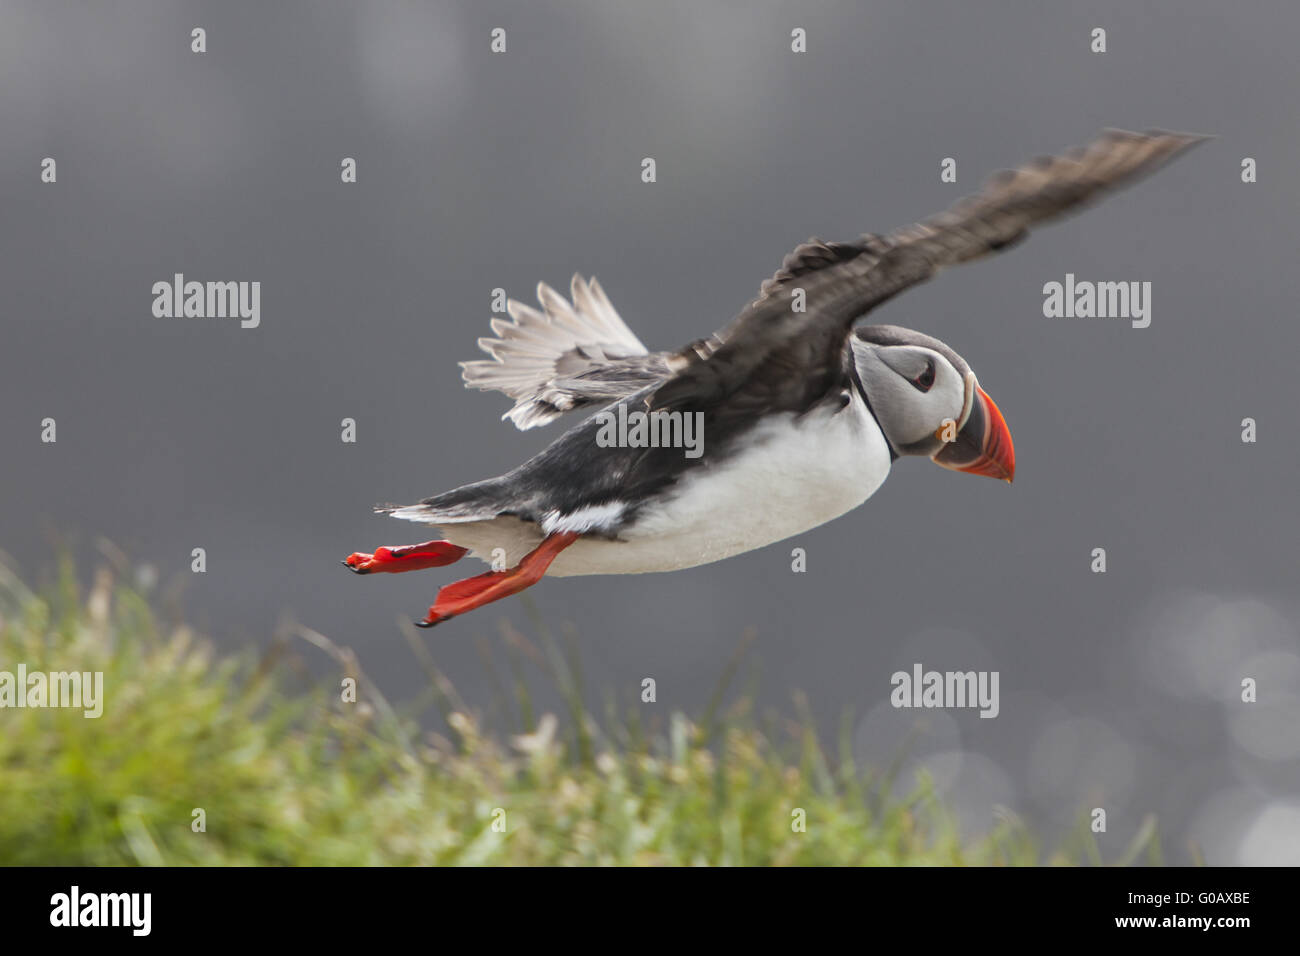 Flying Atlantic puffin (Fratercula arctica), Papey Foto Stock